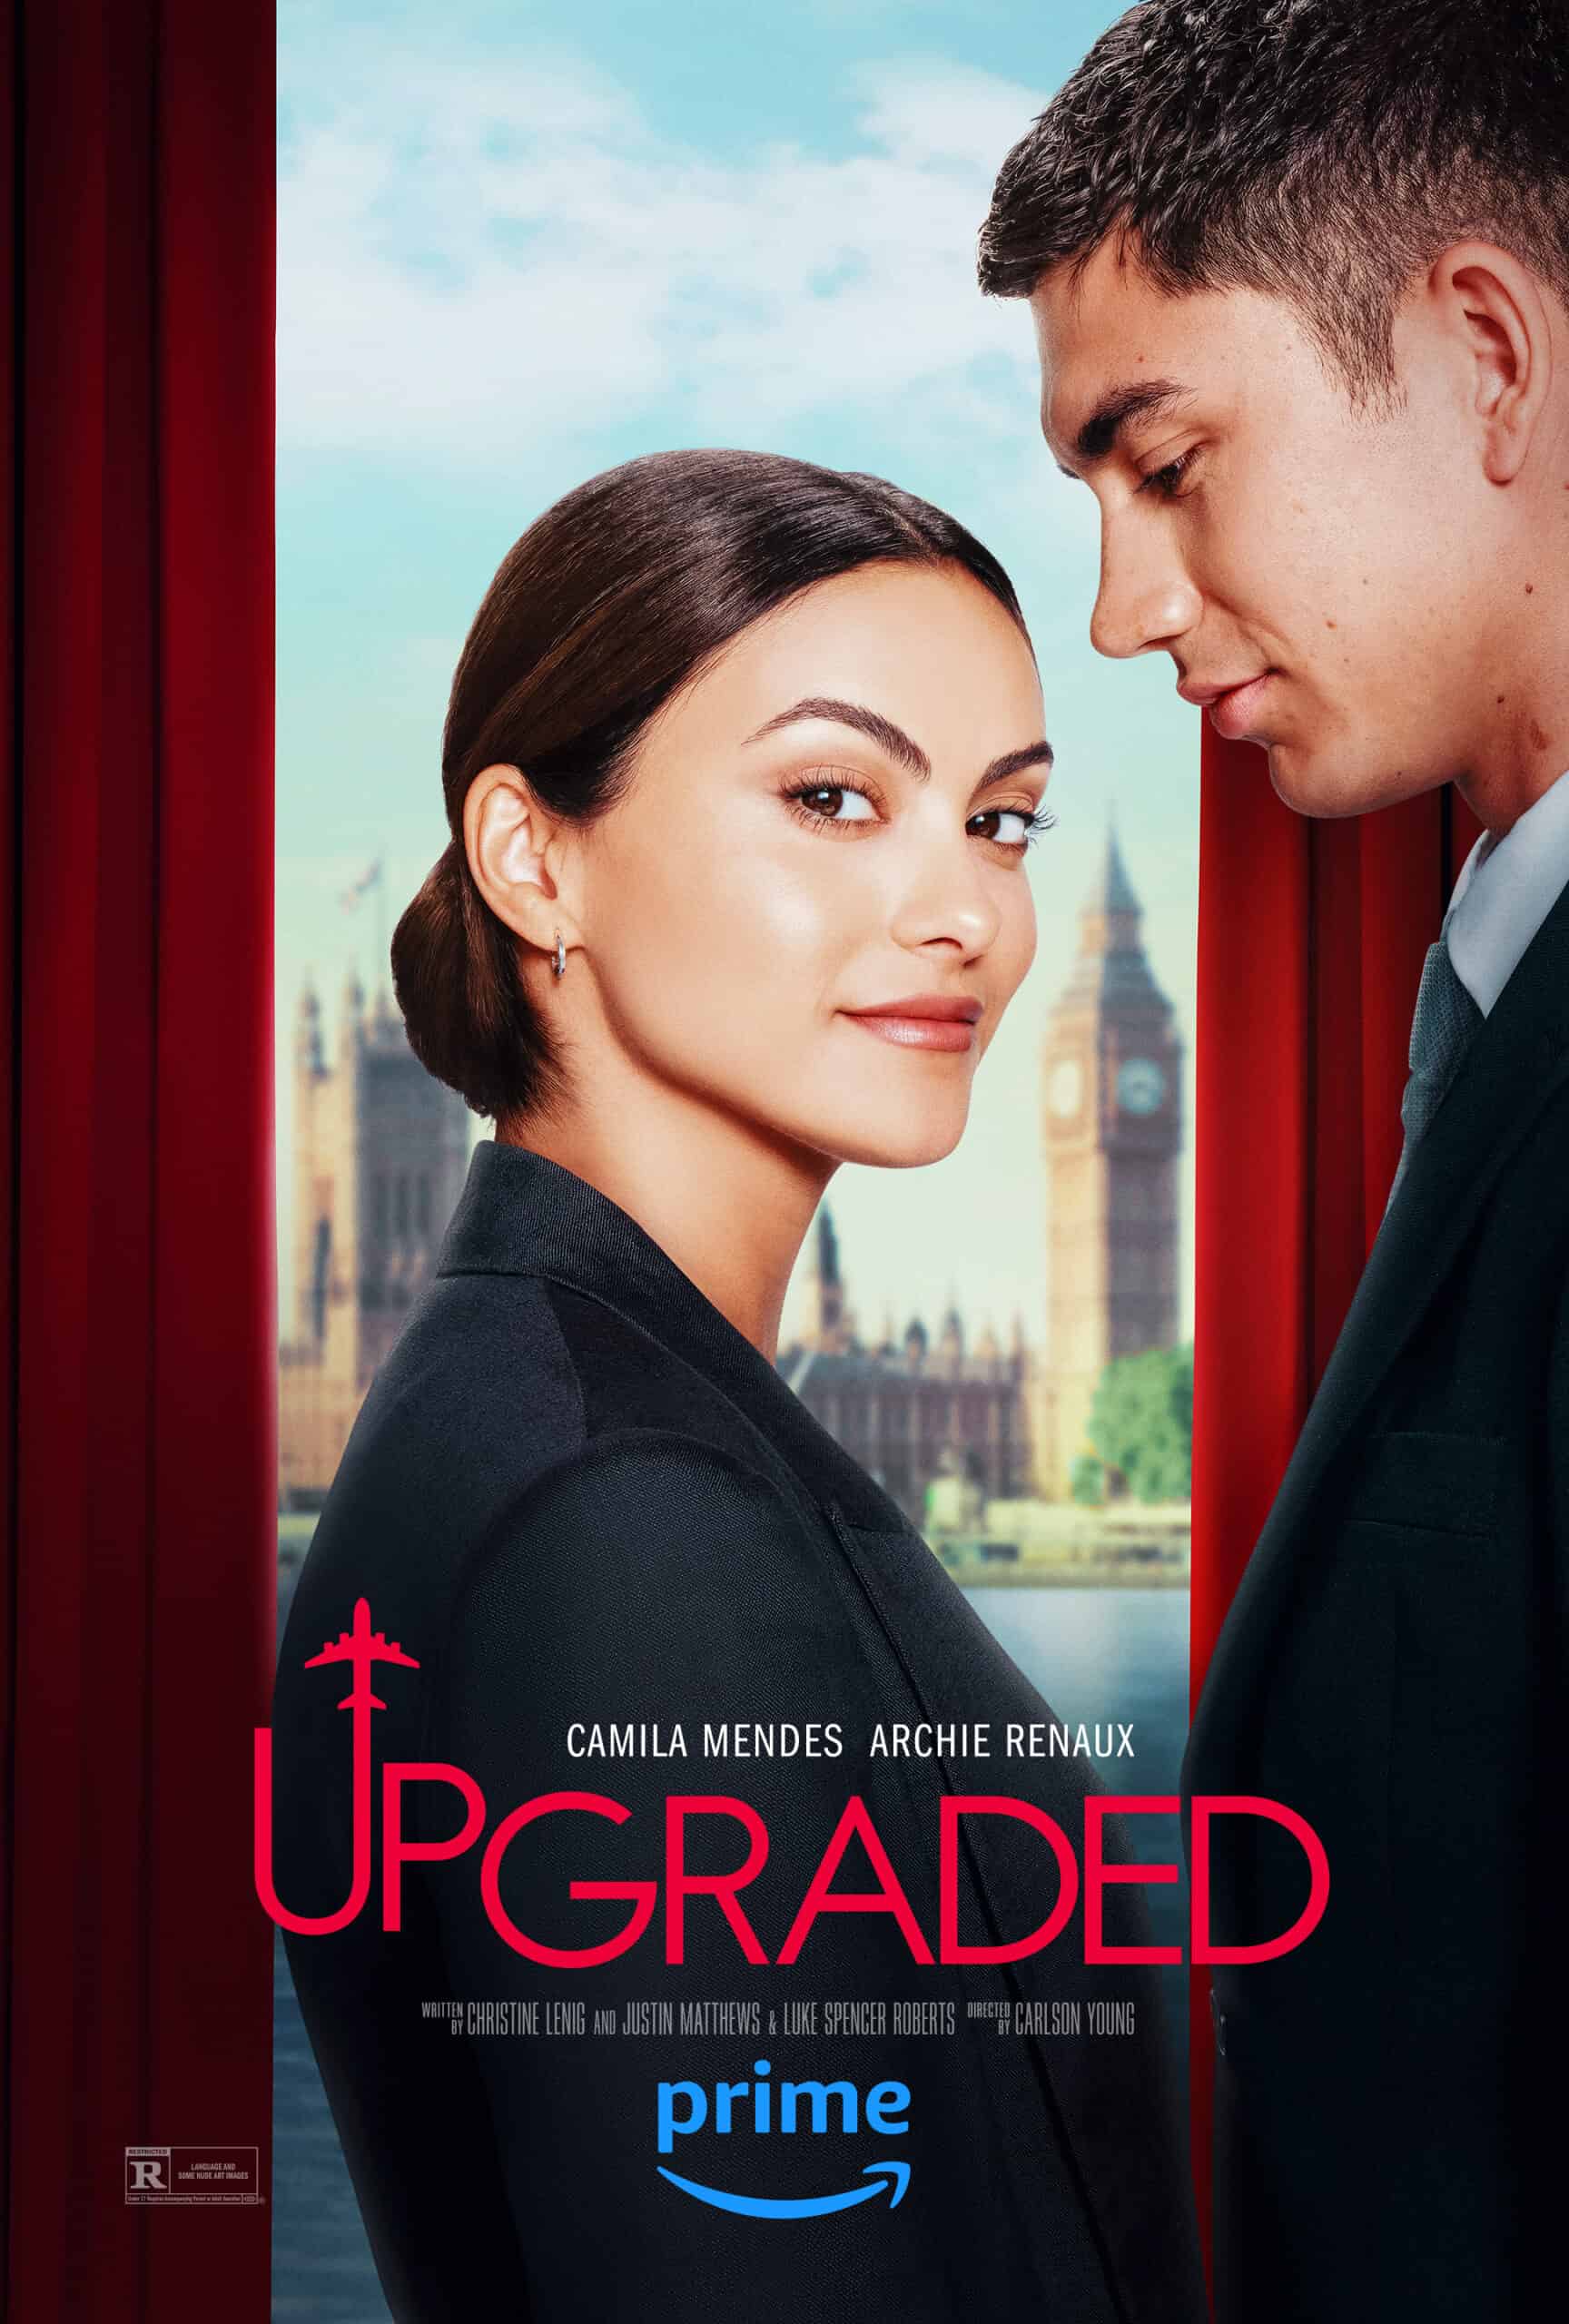 Camila Mendes and Archie Renaux in the Upgraded Movie Poster